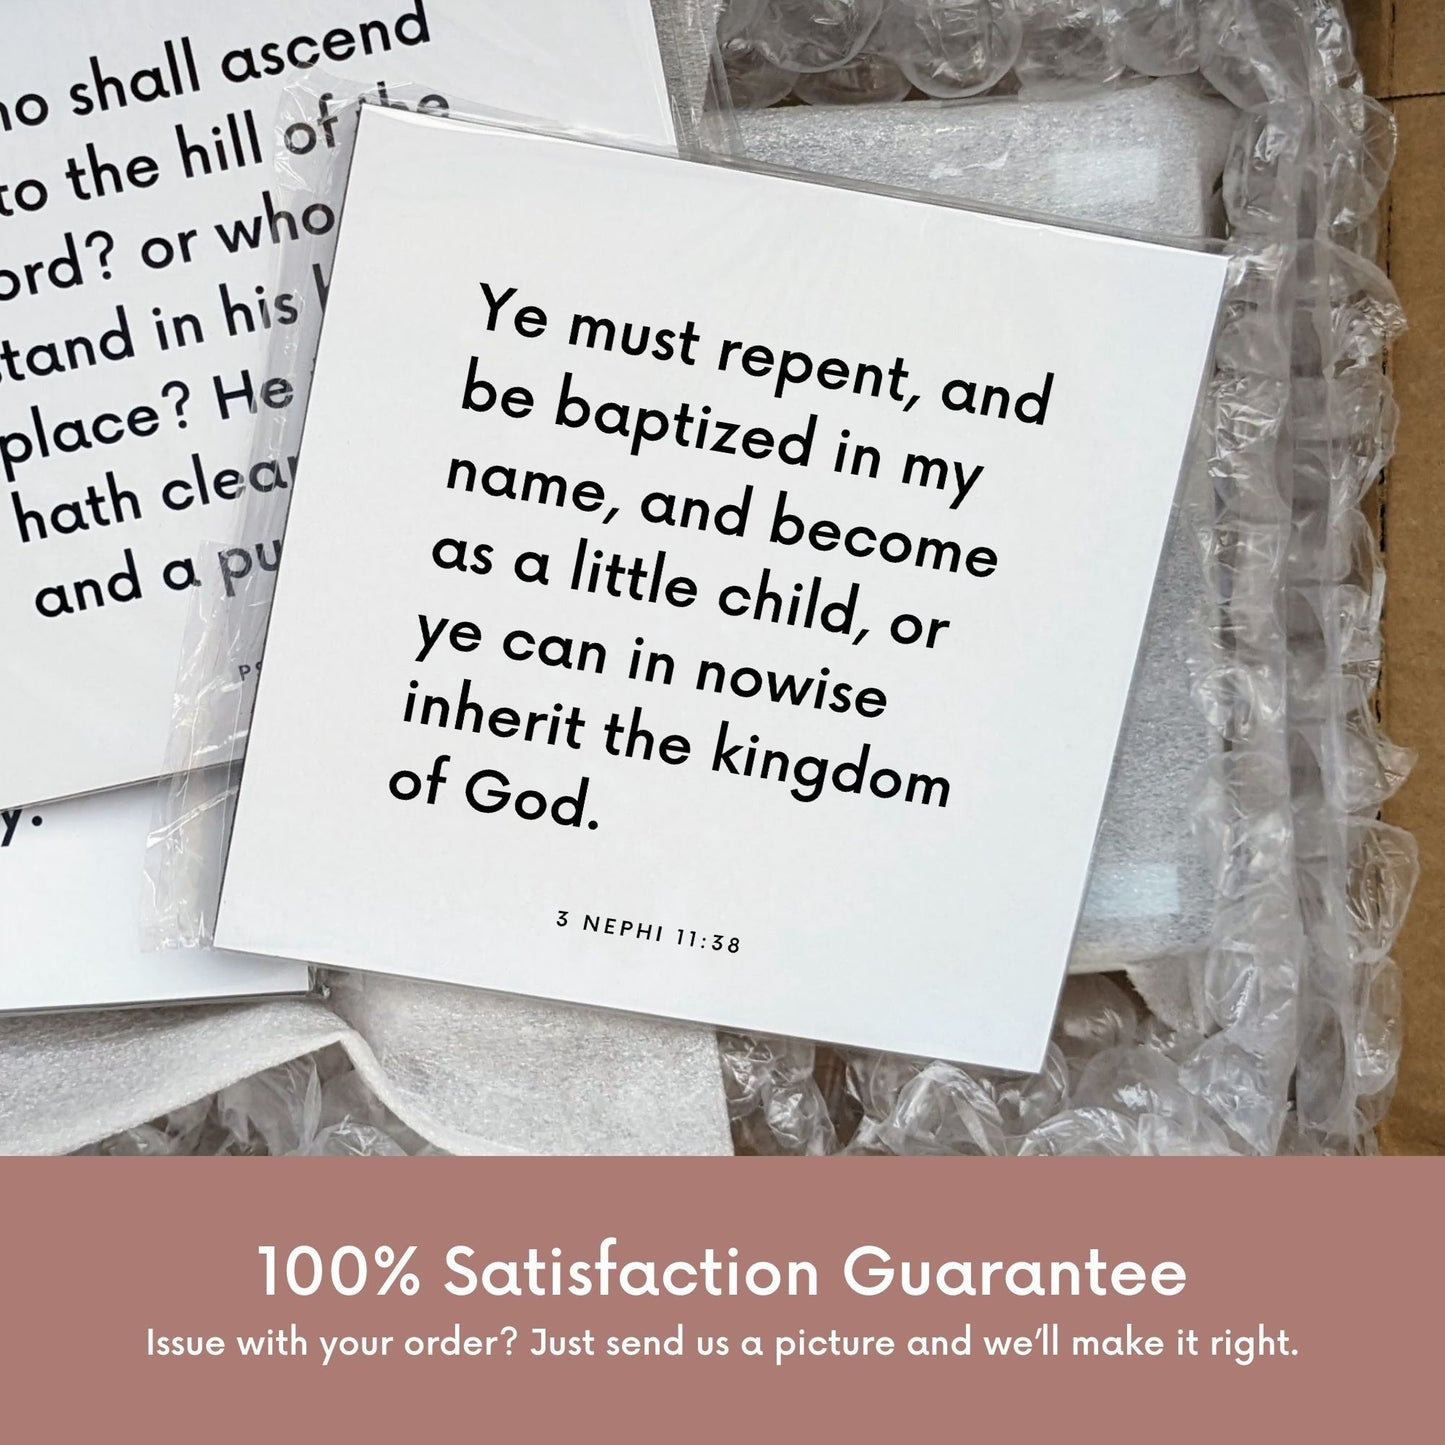 Shipping materials for scripture tile of 3 Nephi 11:38 - "Ye must repent, and be baptized in my name"